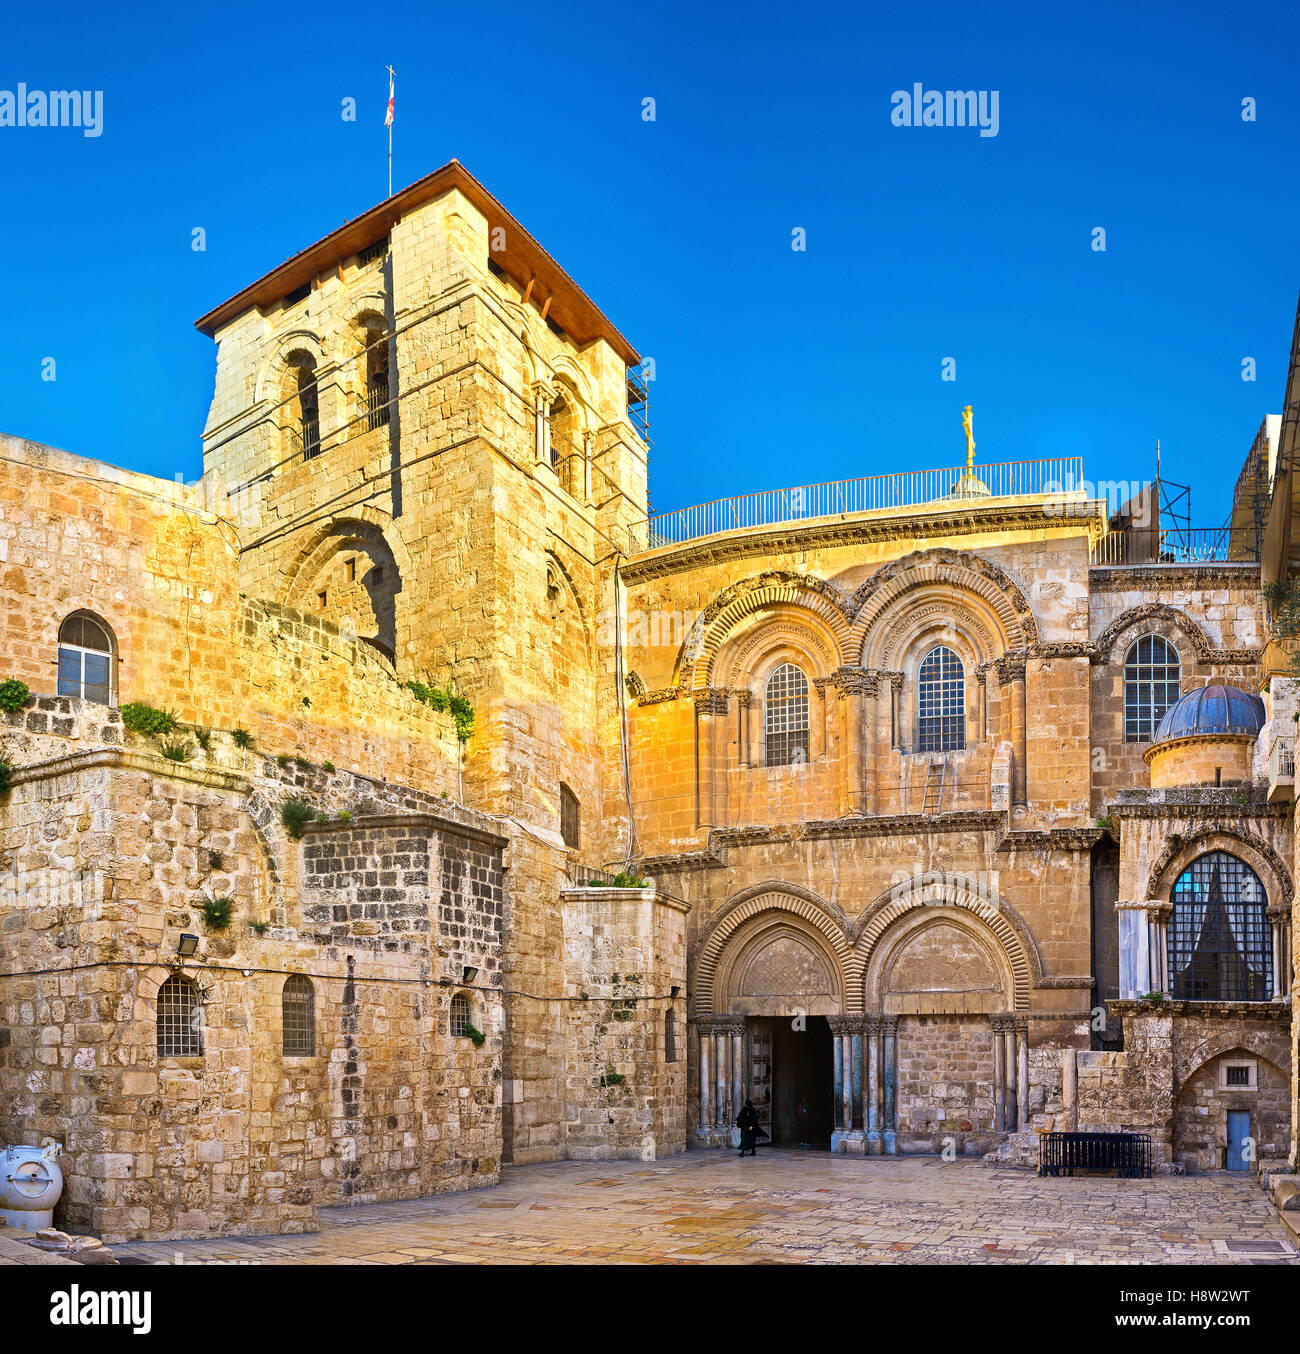 The tiny square (courtyard) in front of the Church of the Holy Sepulchre, one of the main landmarks of Jerusalem, Israel. Stock Photo